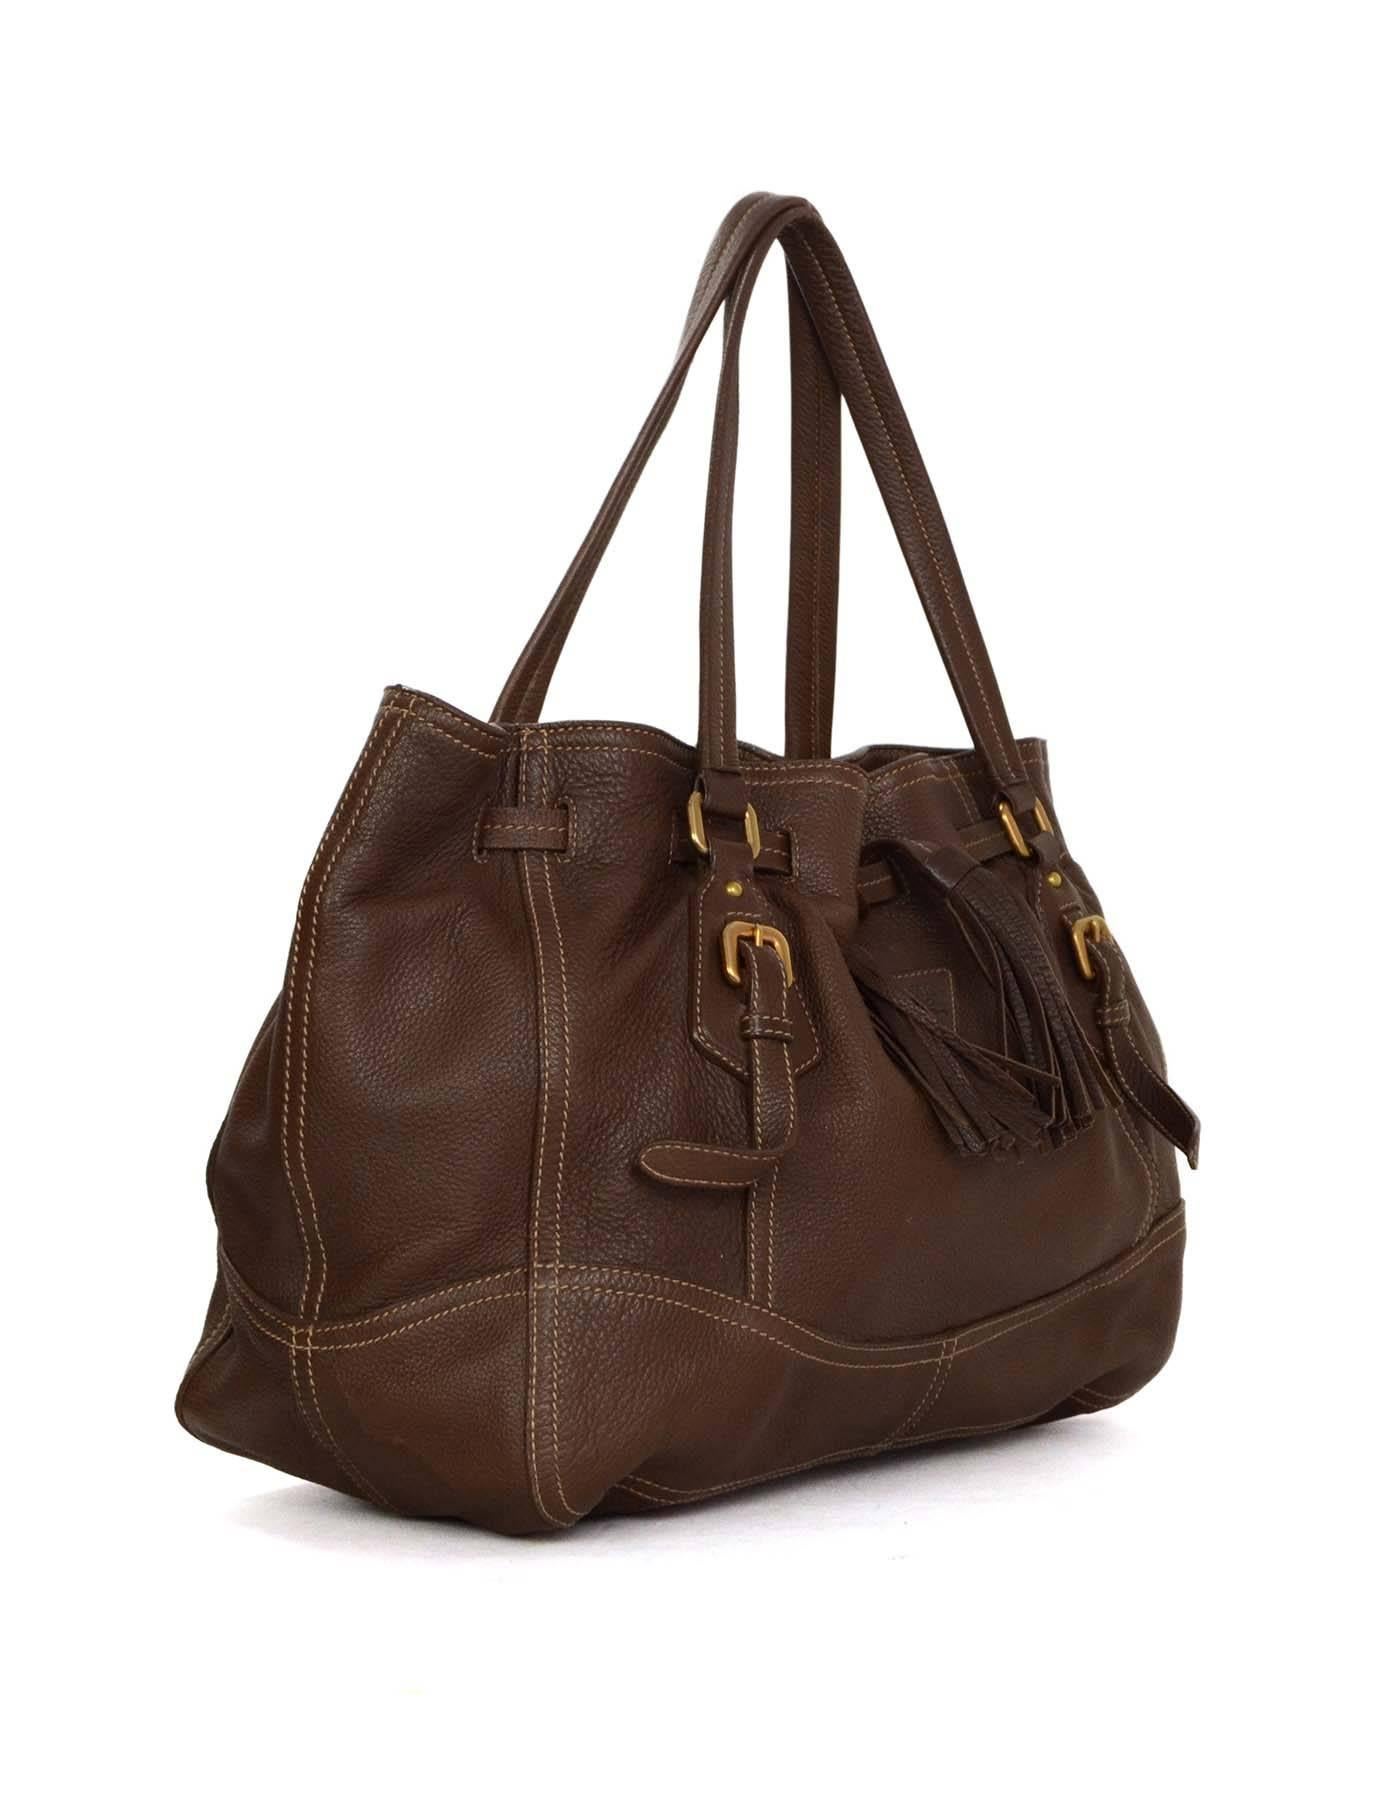 Prada Brown Leather Drawstring Tote 
Made In: Italy
Color: Brown
Hardware: Goldtone
Materials: Leather
Lining: Beige canvas
Closure/Opening: Drawstring closure 
Exterior Pockets: None
Interior Pockets: One zipper pocket, one flat pocket and